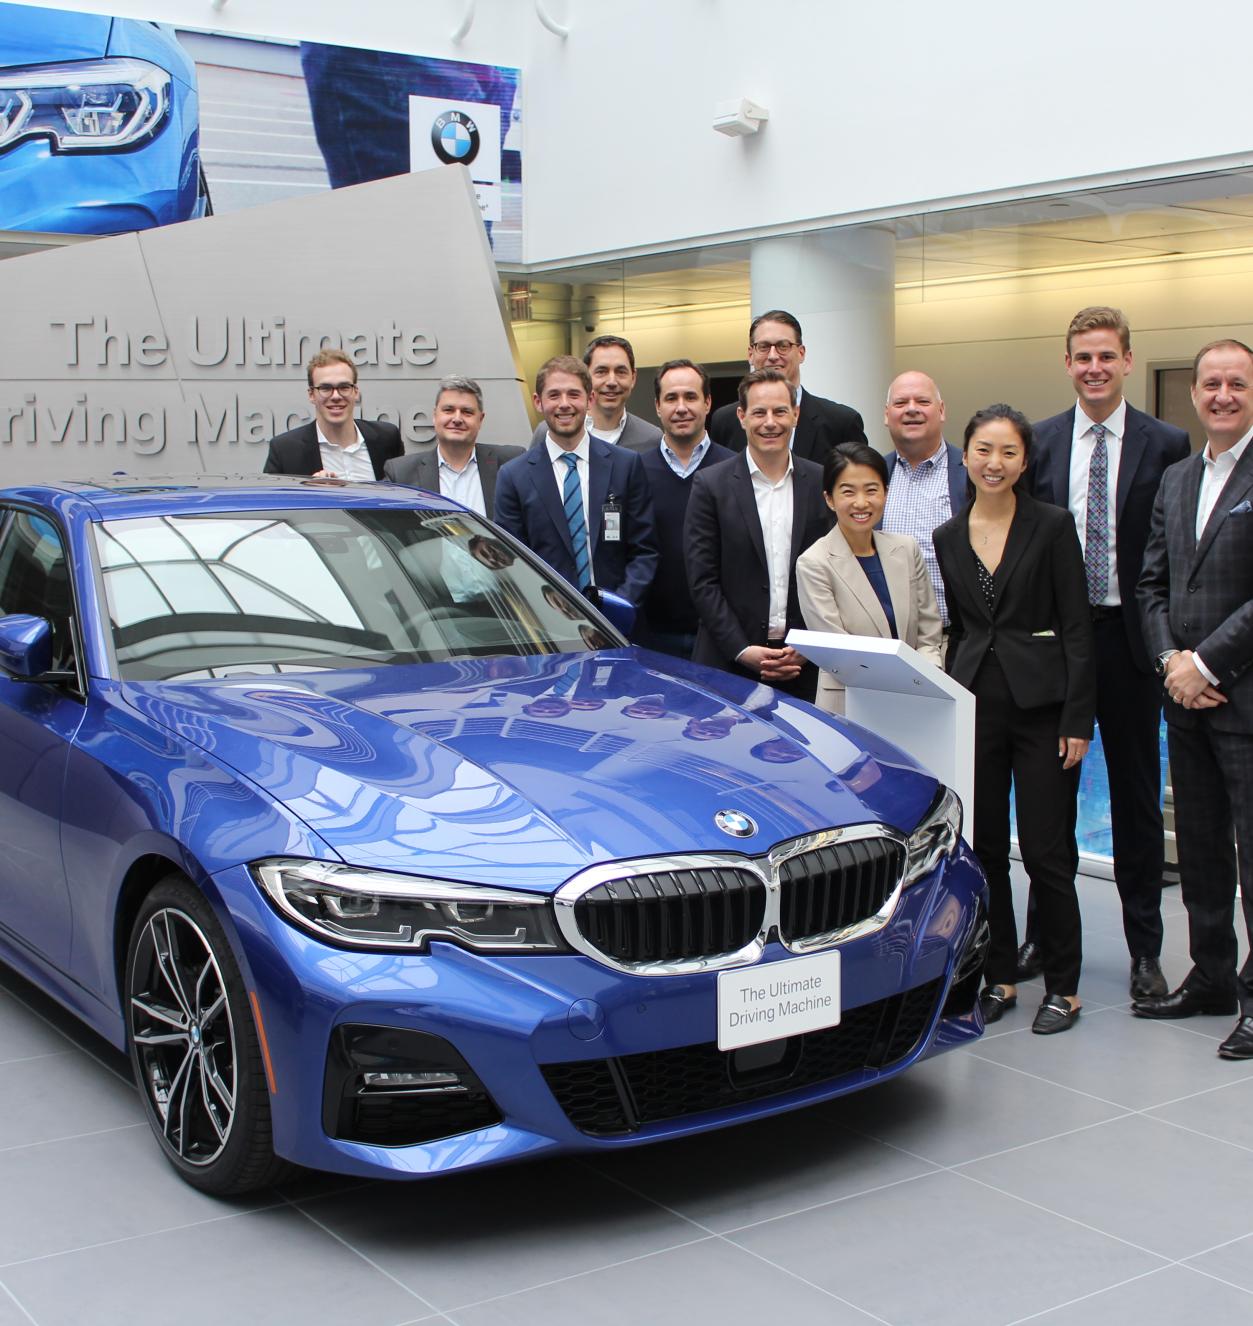 A smiling group of people standing beside a blue car